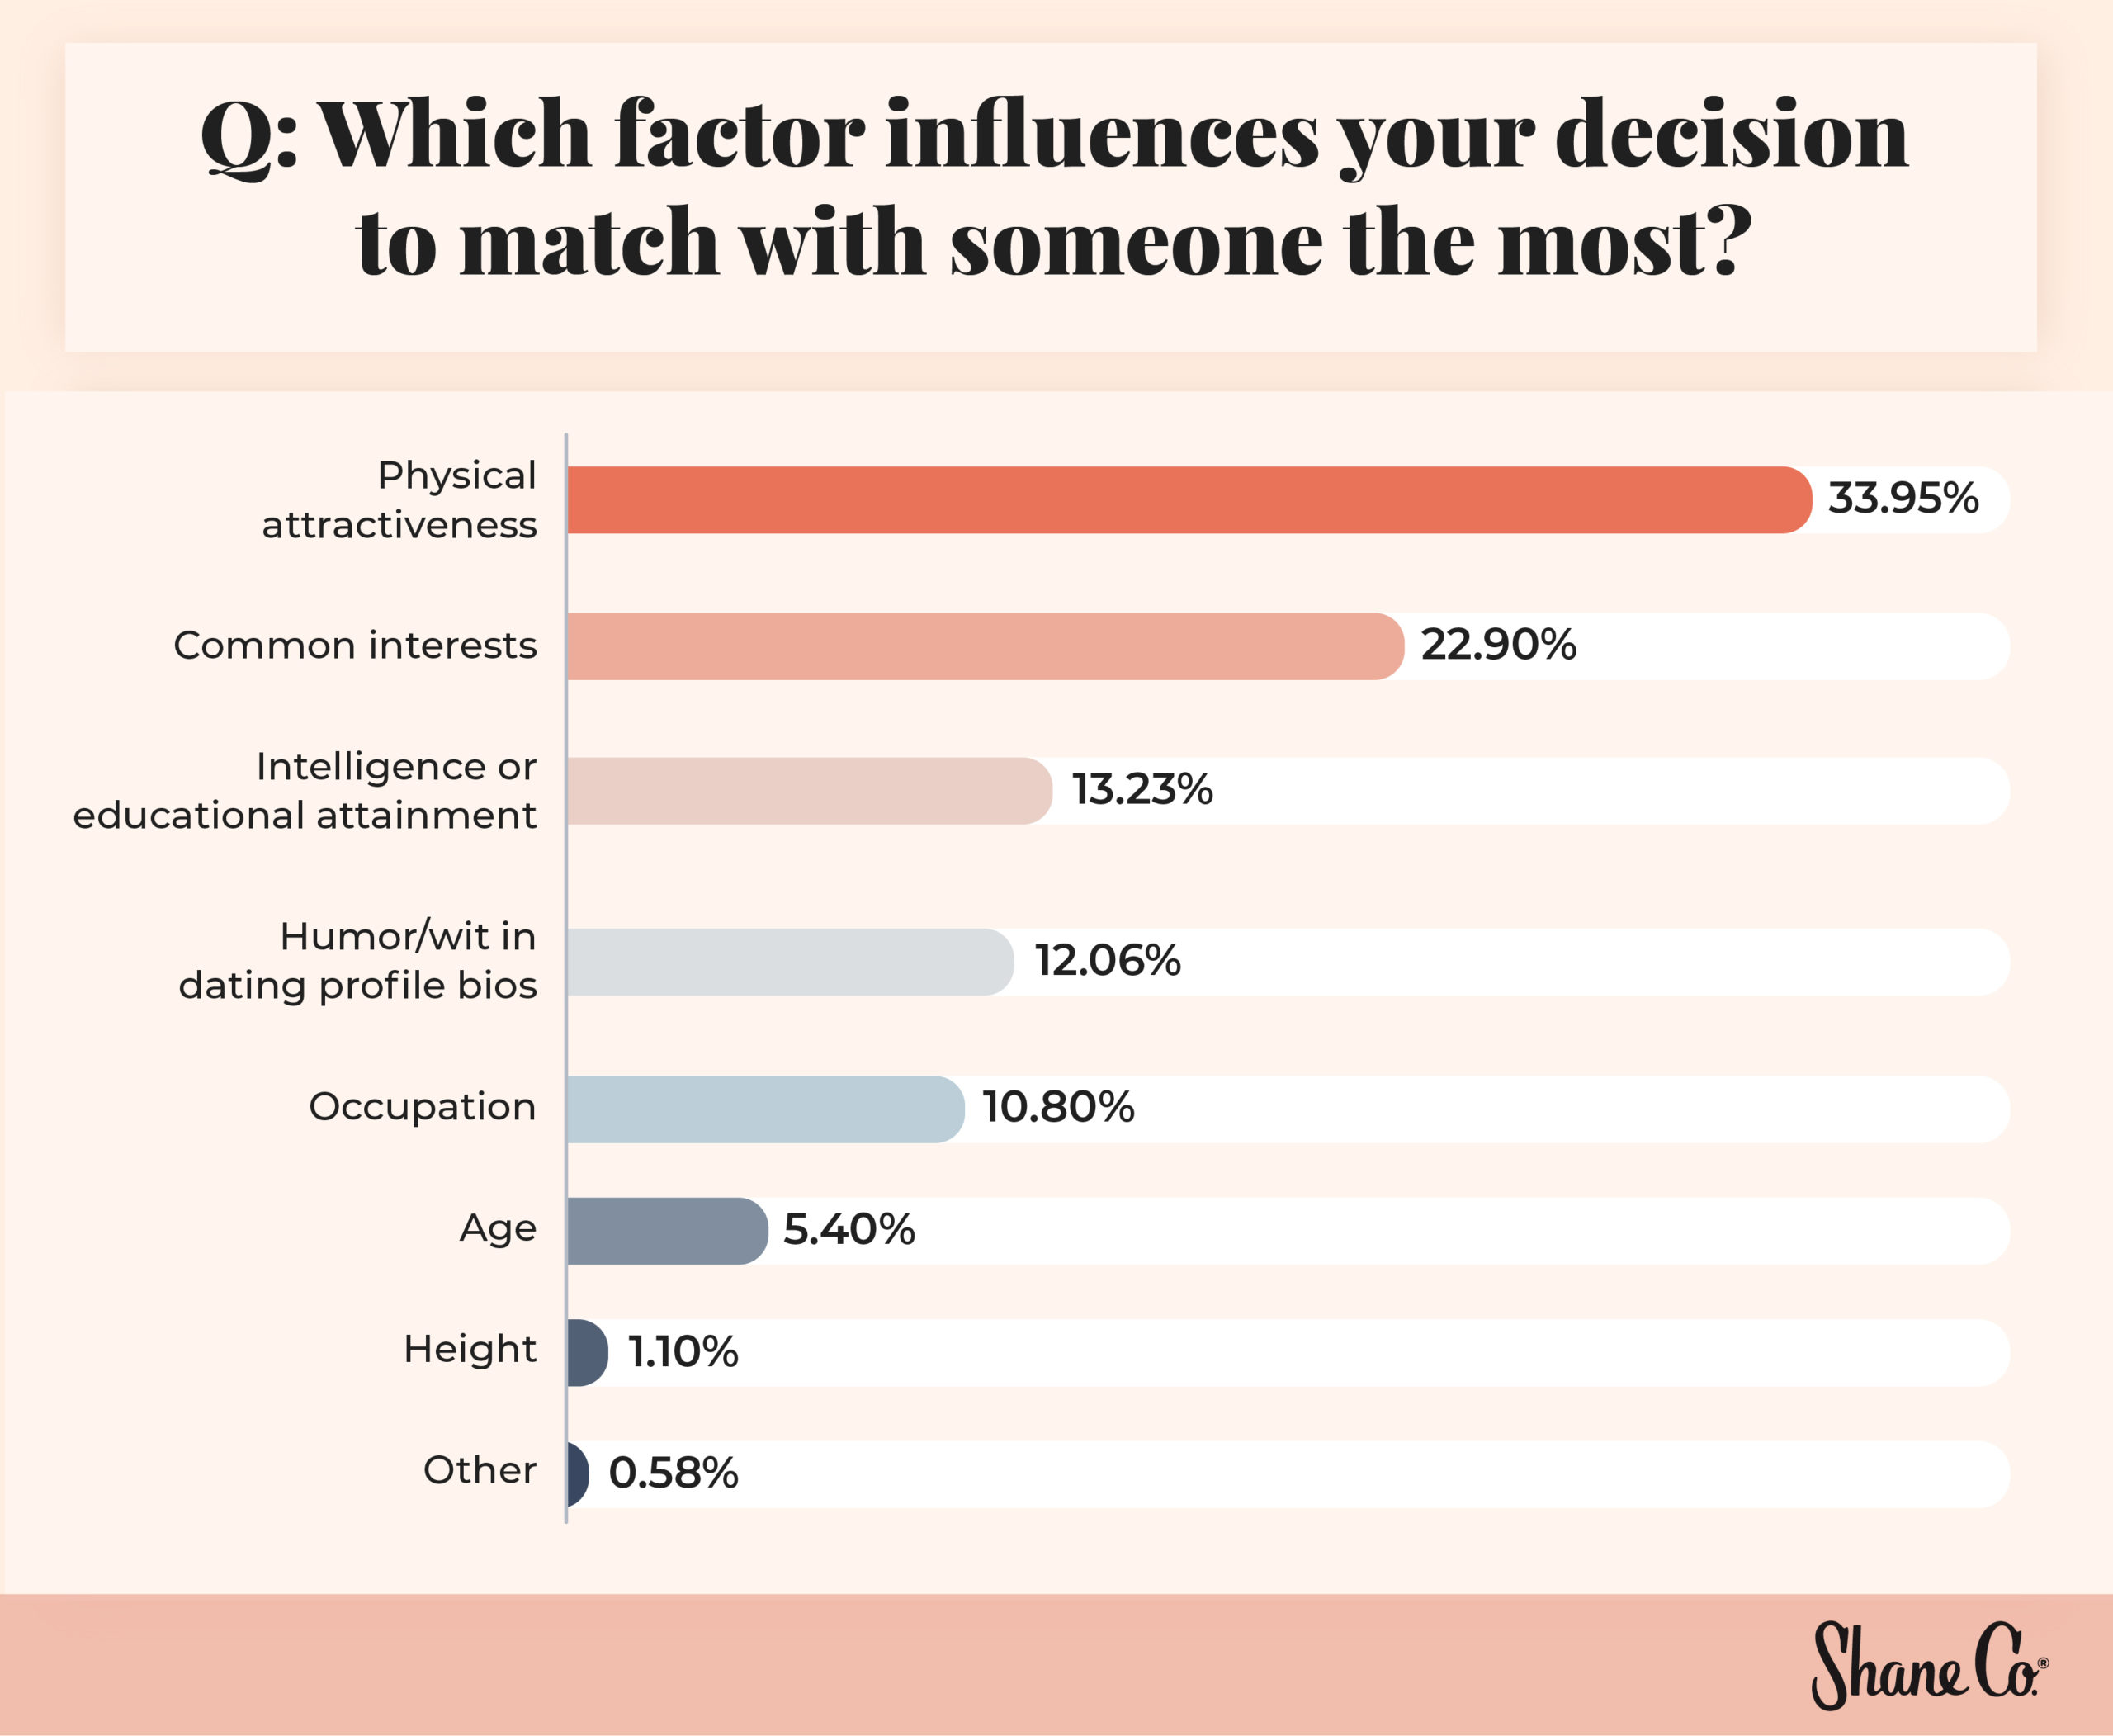 Bar chart showing which factor influences a decision the most to match with someone.